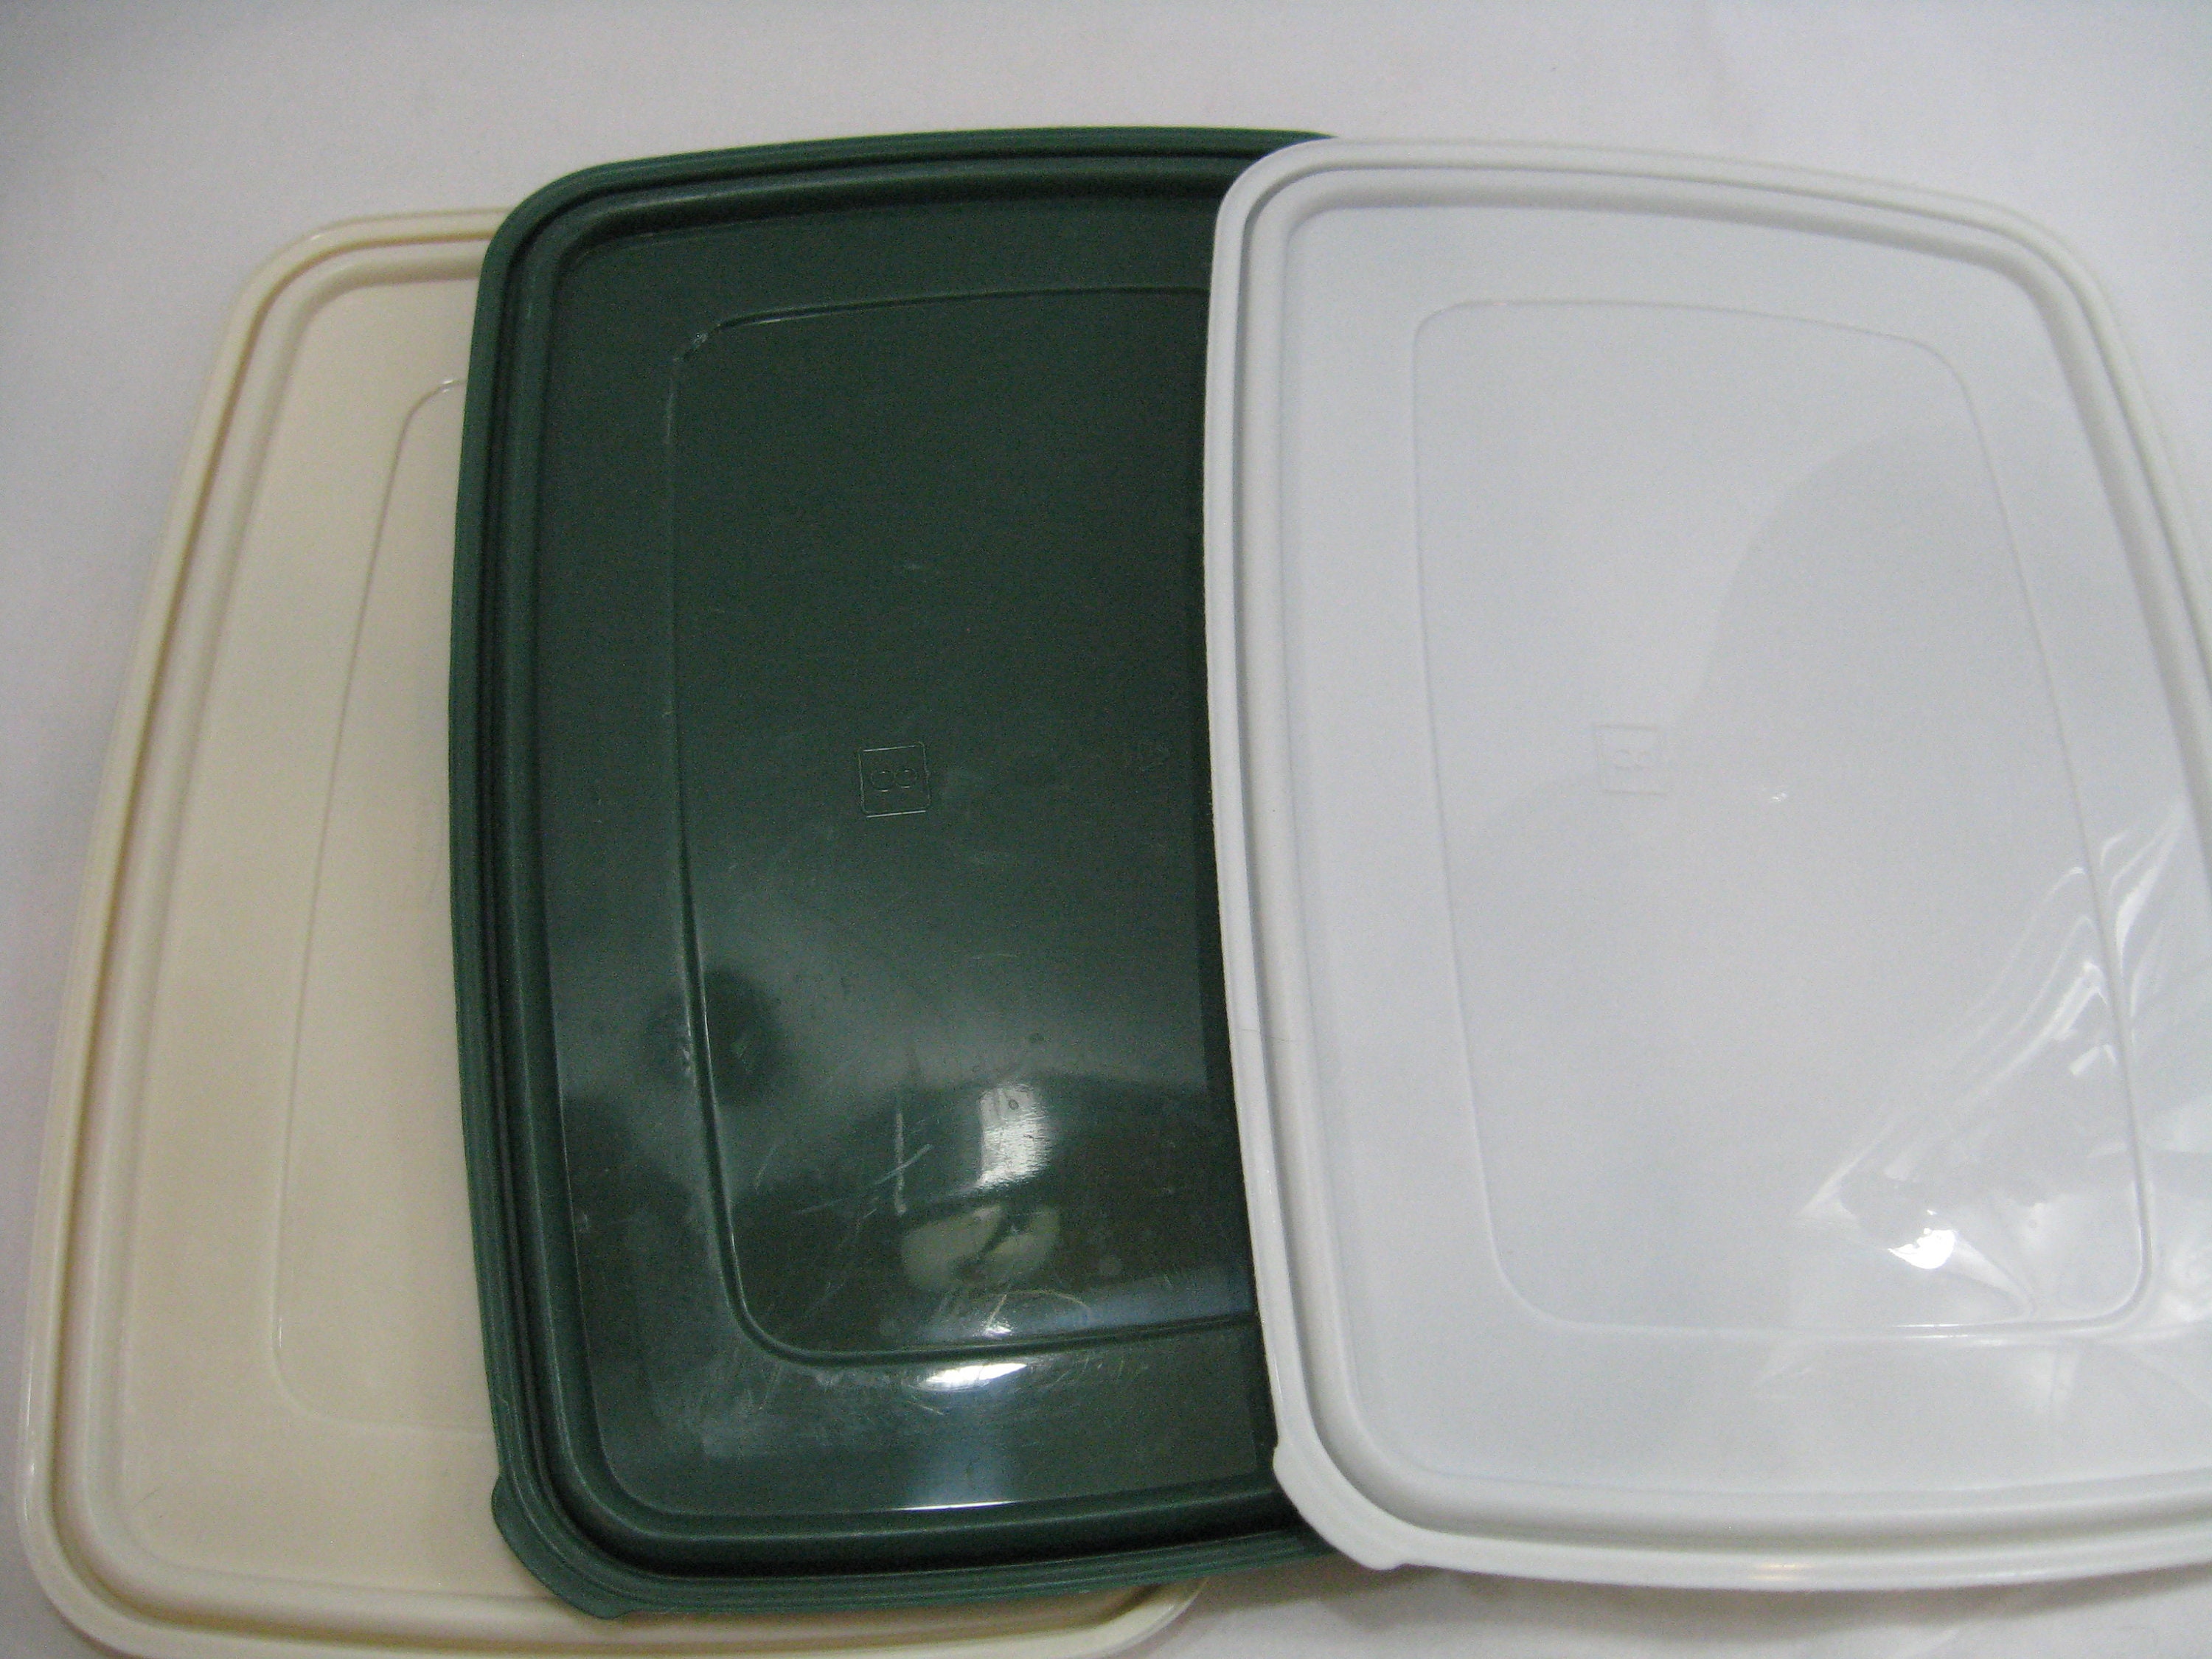 Rubbermaid Servin' Saver Plastic Containers, Canisters, Food Storage, 1980s  choose With or Without Lid 